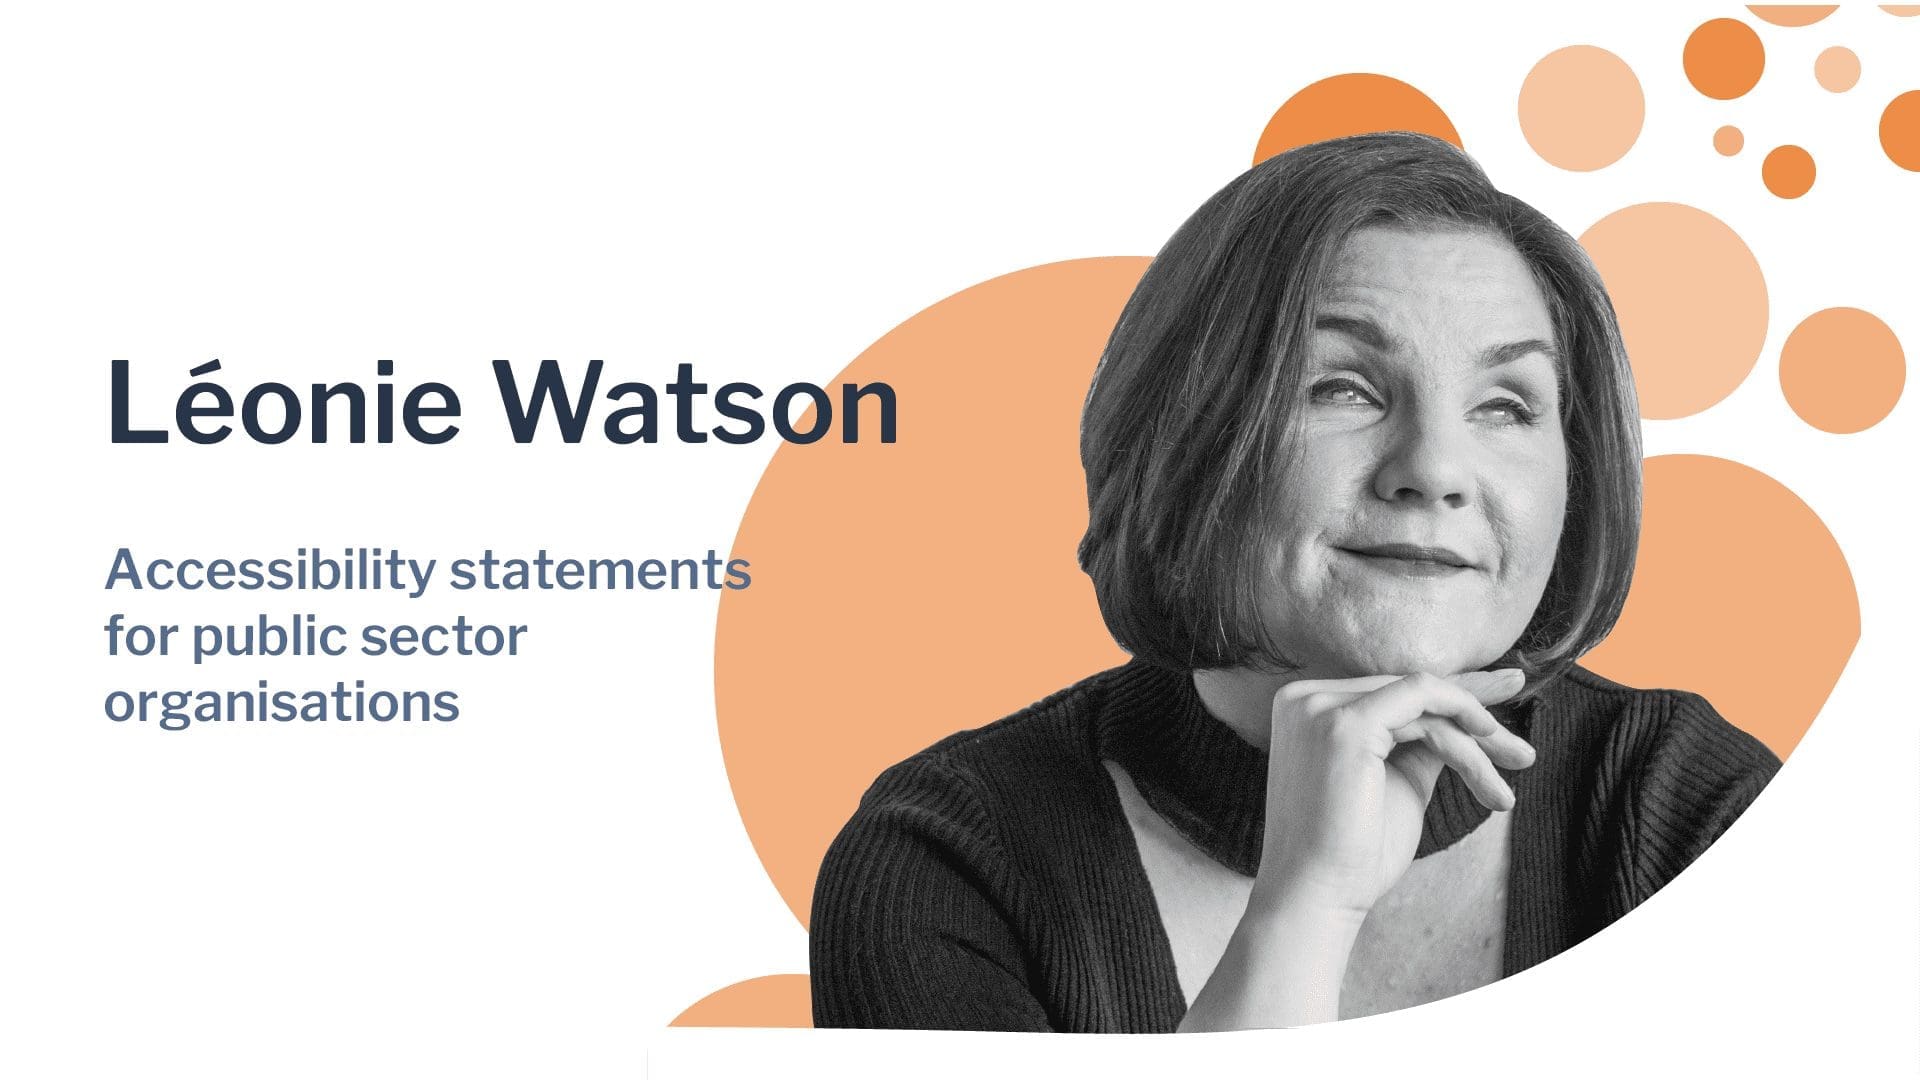 Banner showing Leonie Watson image and blog title Accessibility statements for public sector organisations